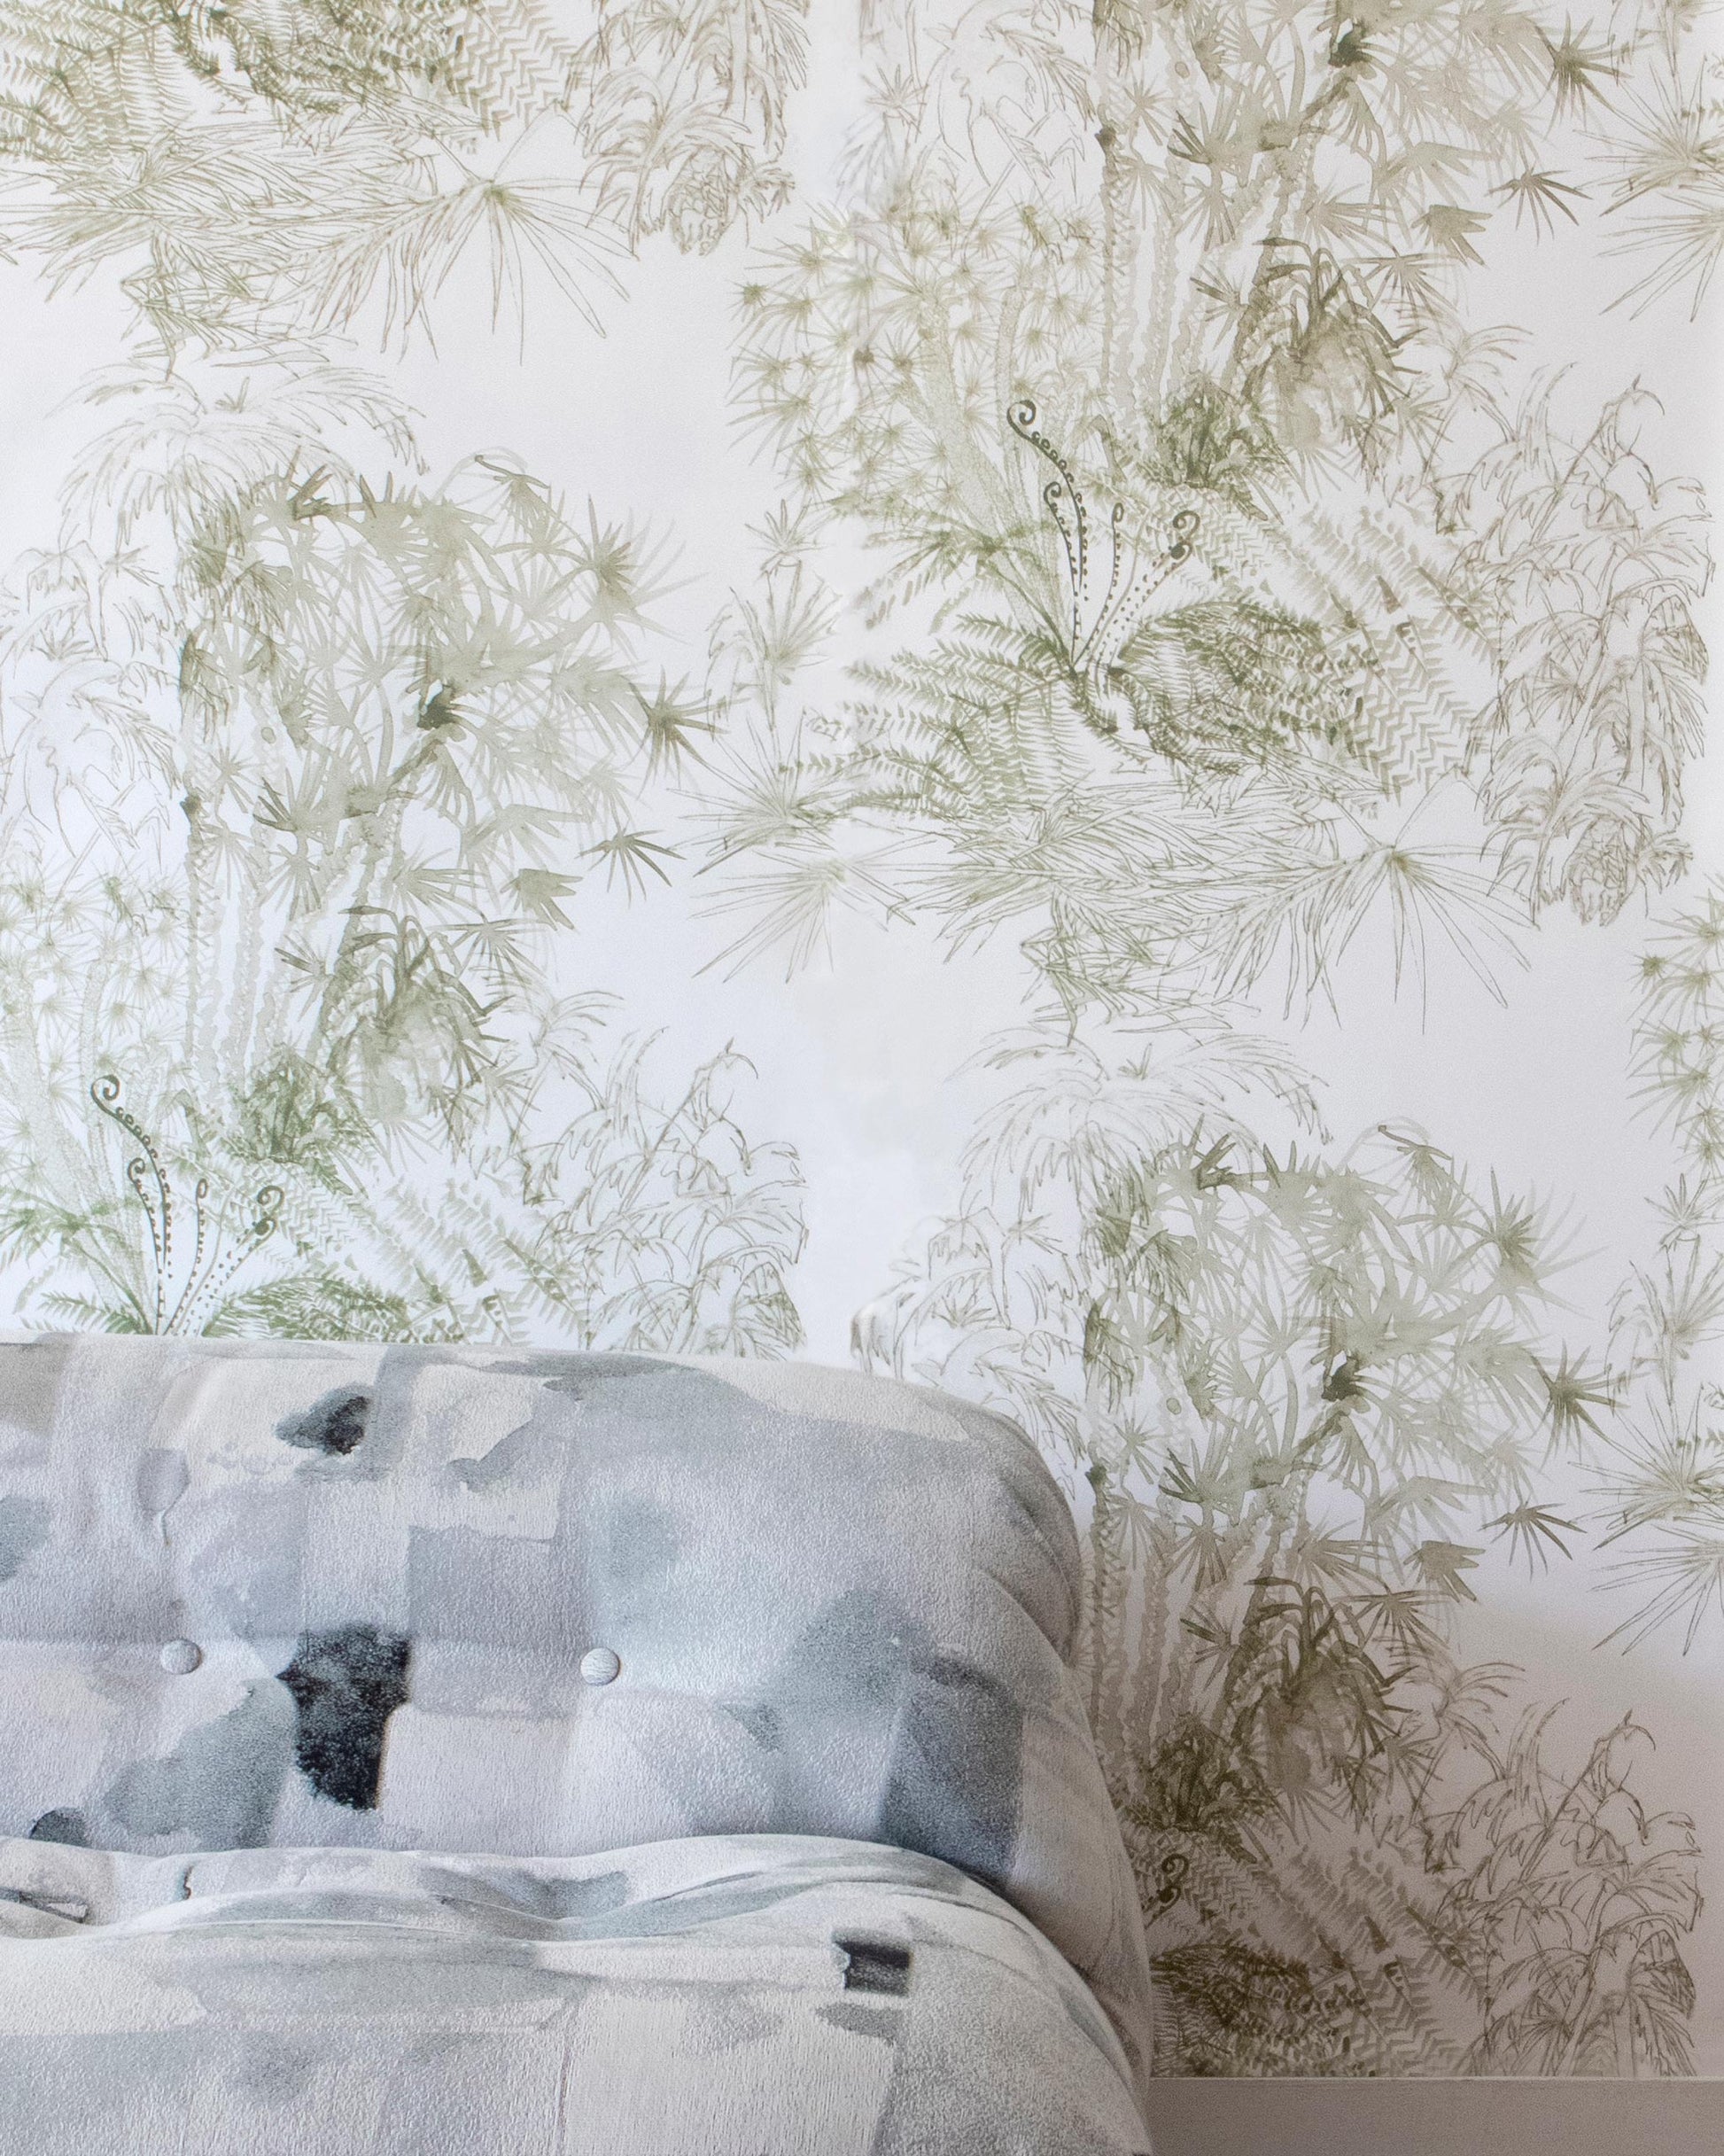 A bed in a room with Domenica Wallpaper Brush pattern